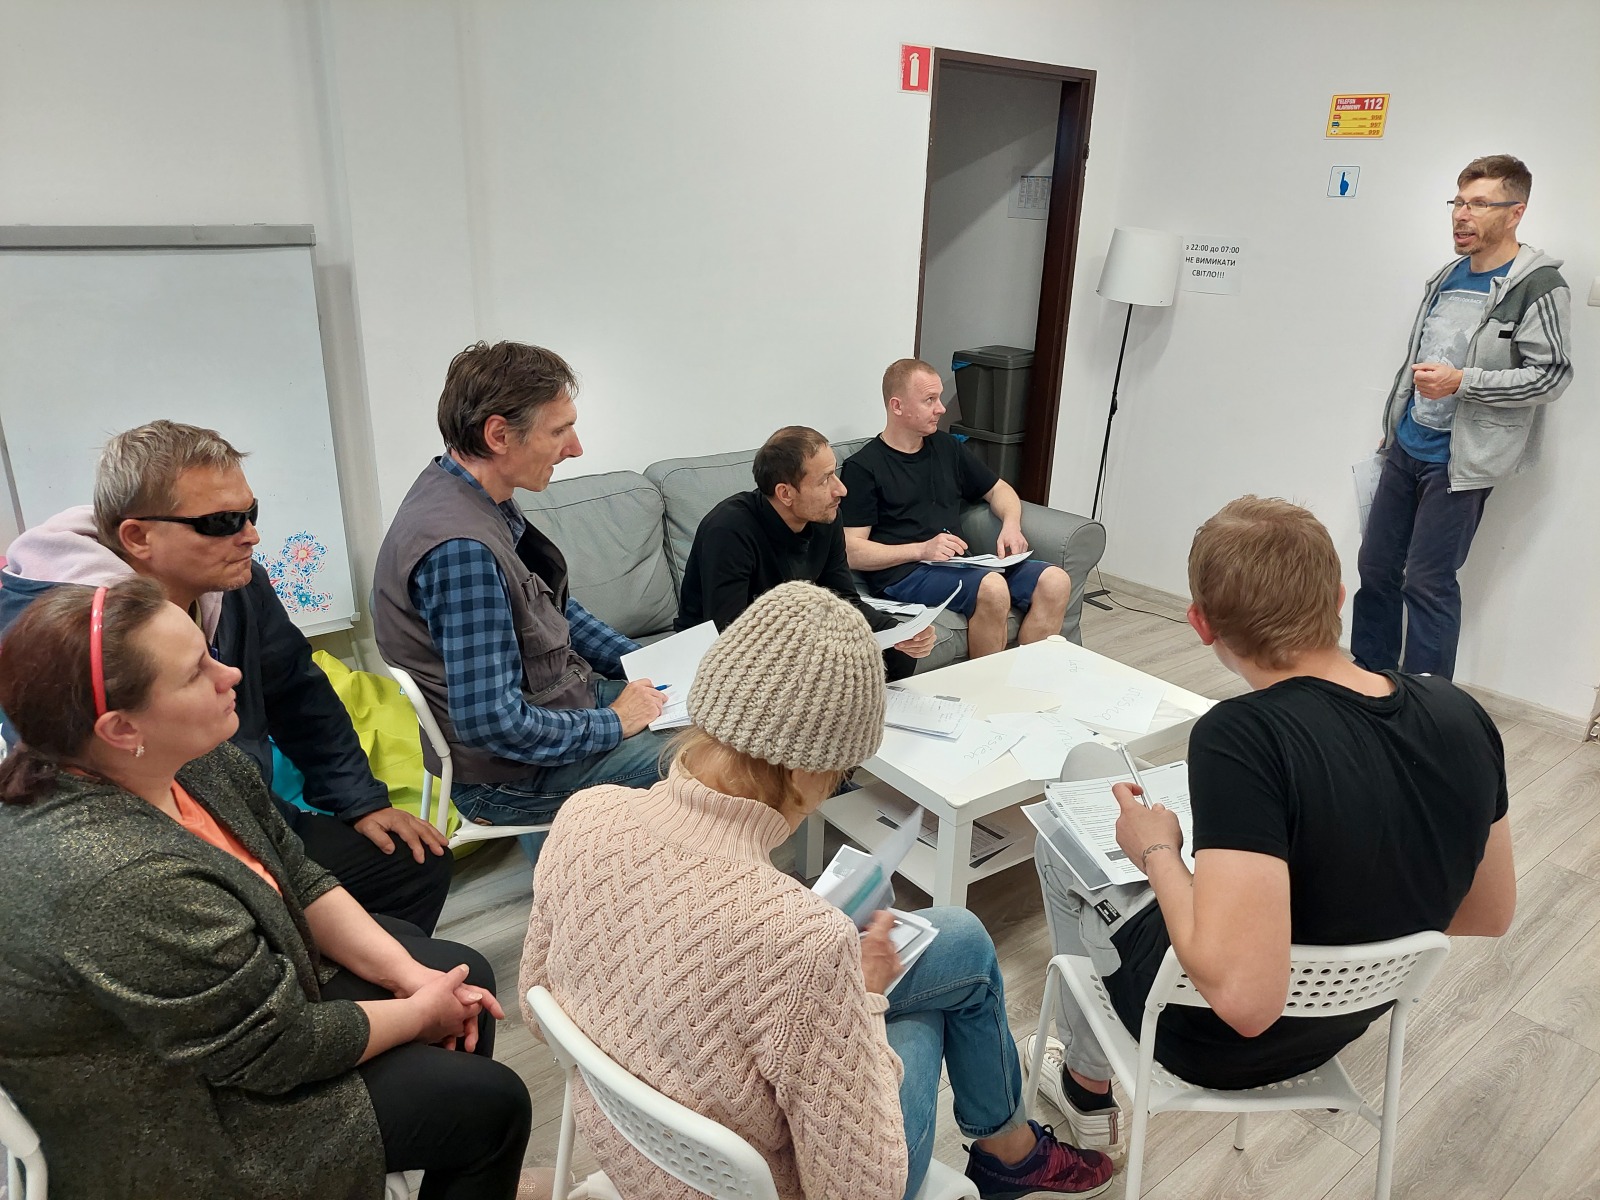 POLISH LANGUAGE WORKSHOPS FOR PEOPLE AT THE RECEPTION POINT IN KRAKOW, CONDUCTED IN COOPERATION WITH THE MUDITA ASSOCIATION (OCTOBER 2022)